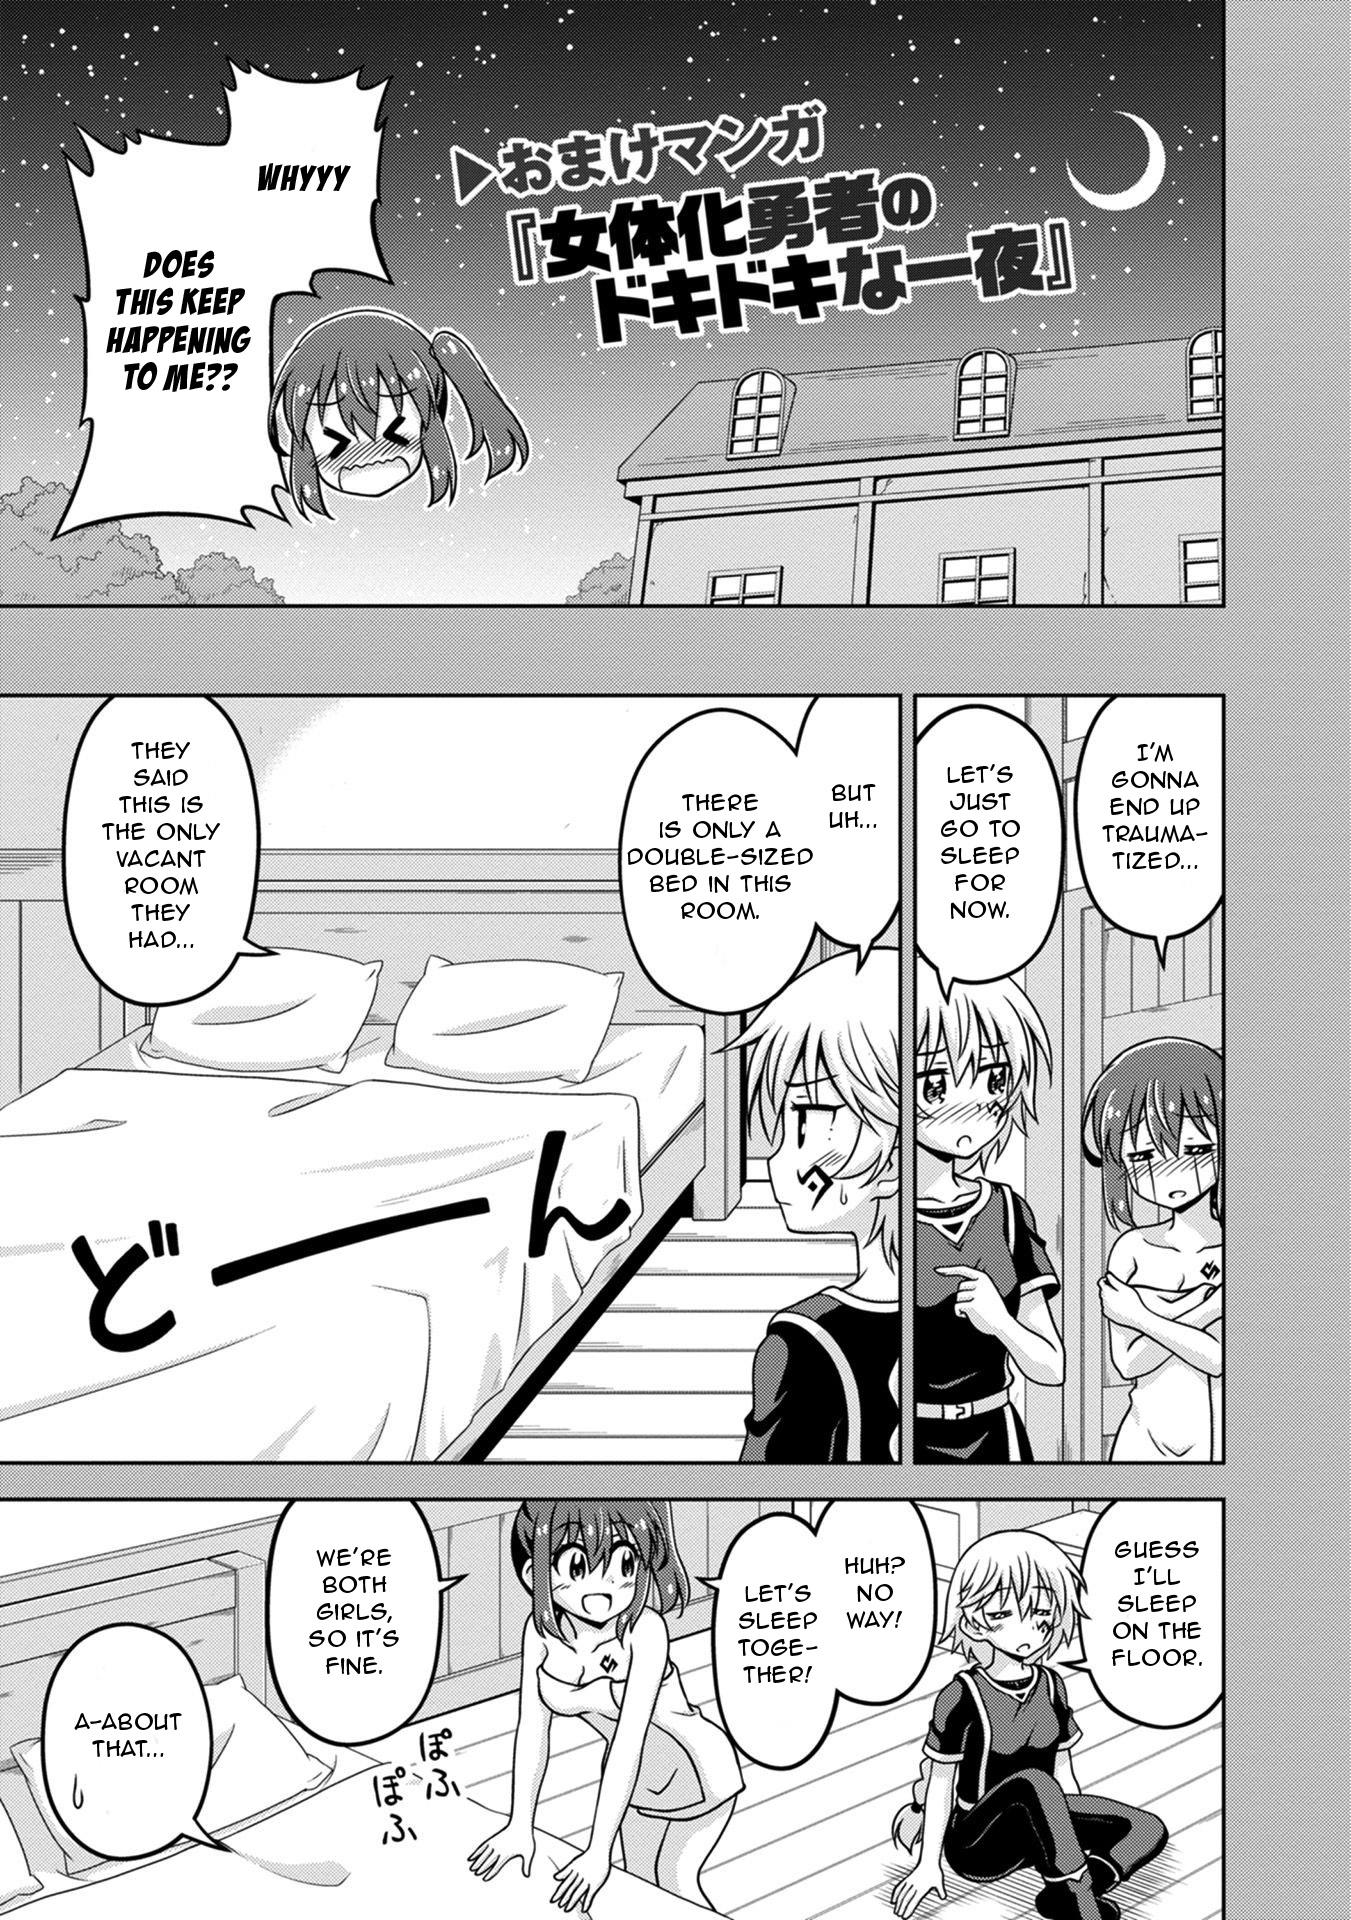 Don't Call Me A Naked Hero In Another World Vol.1 Ch.4.5 Page 1 - Mangago